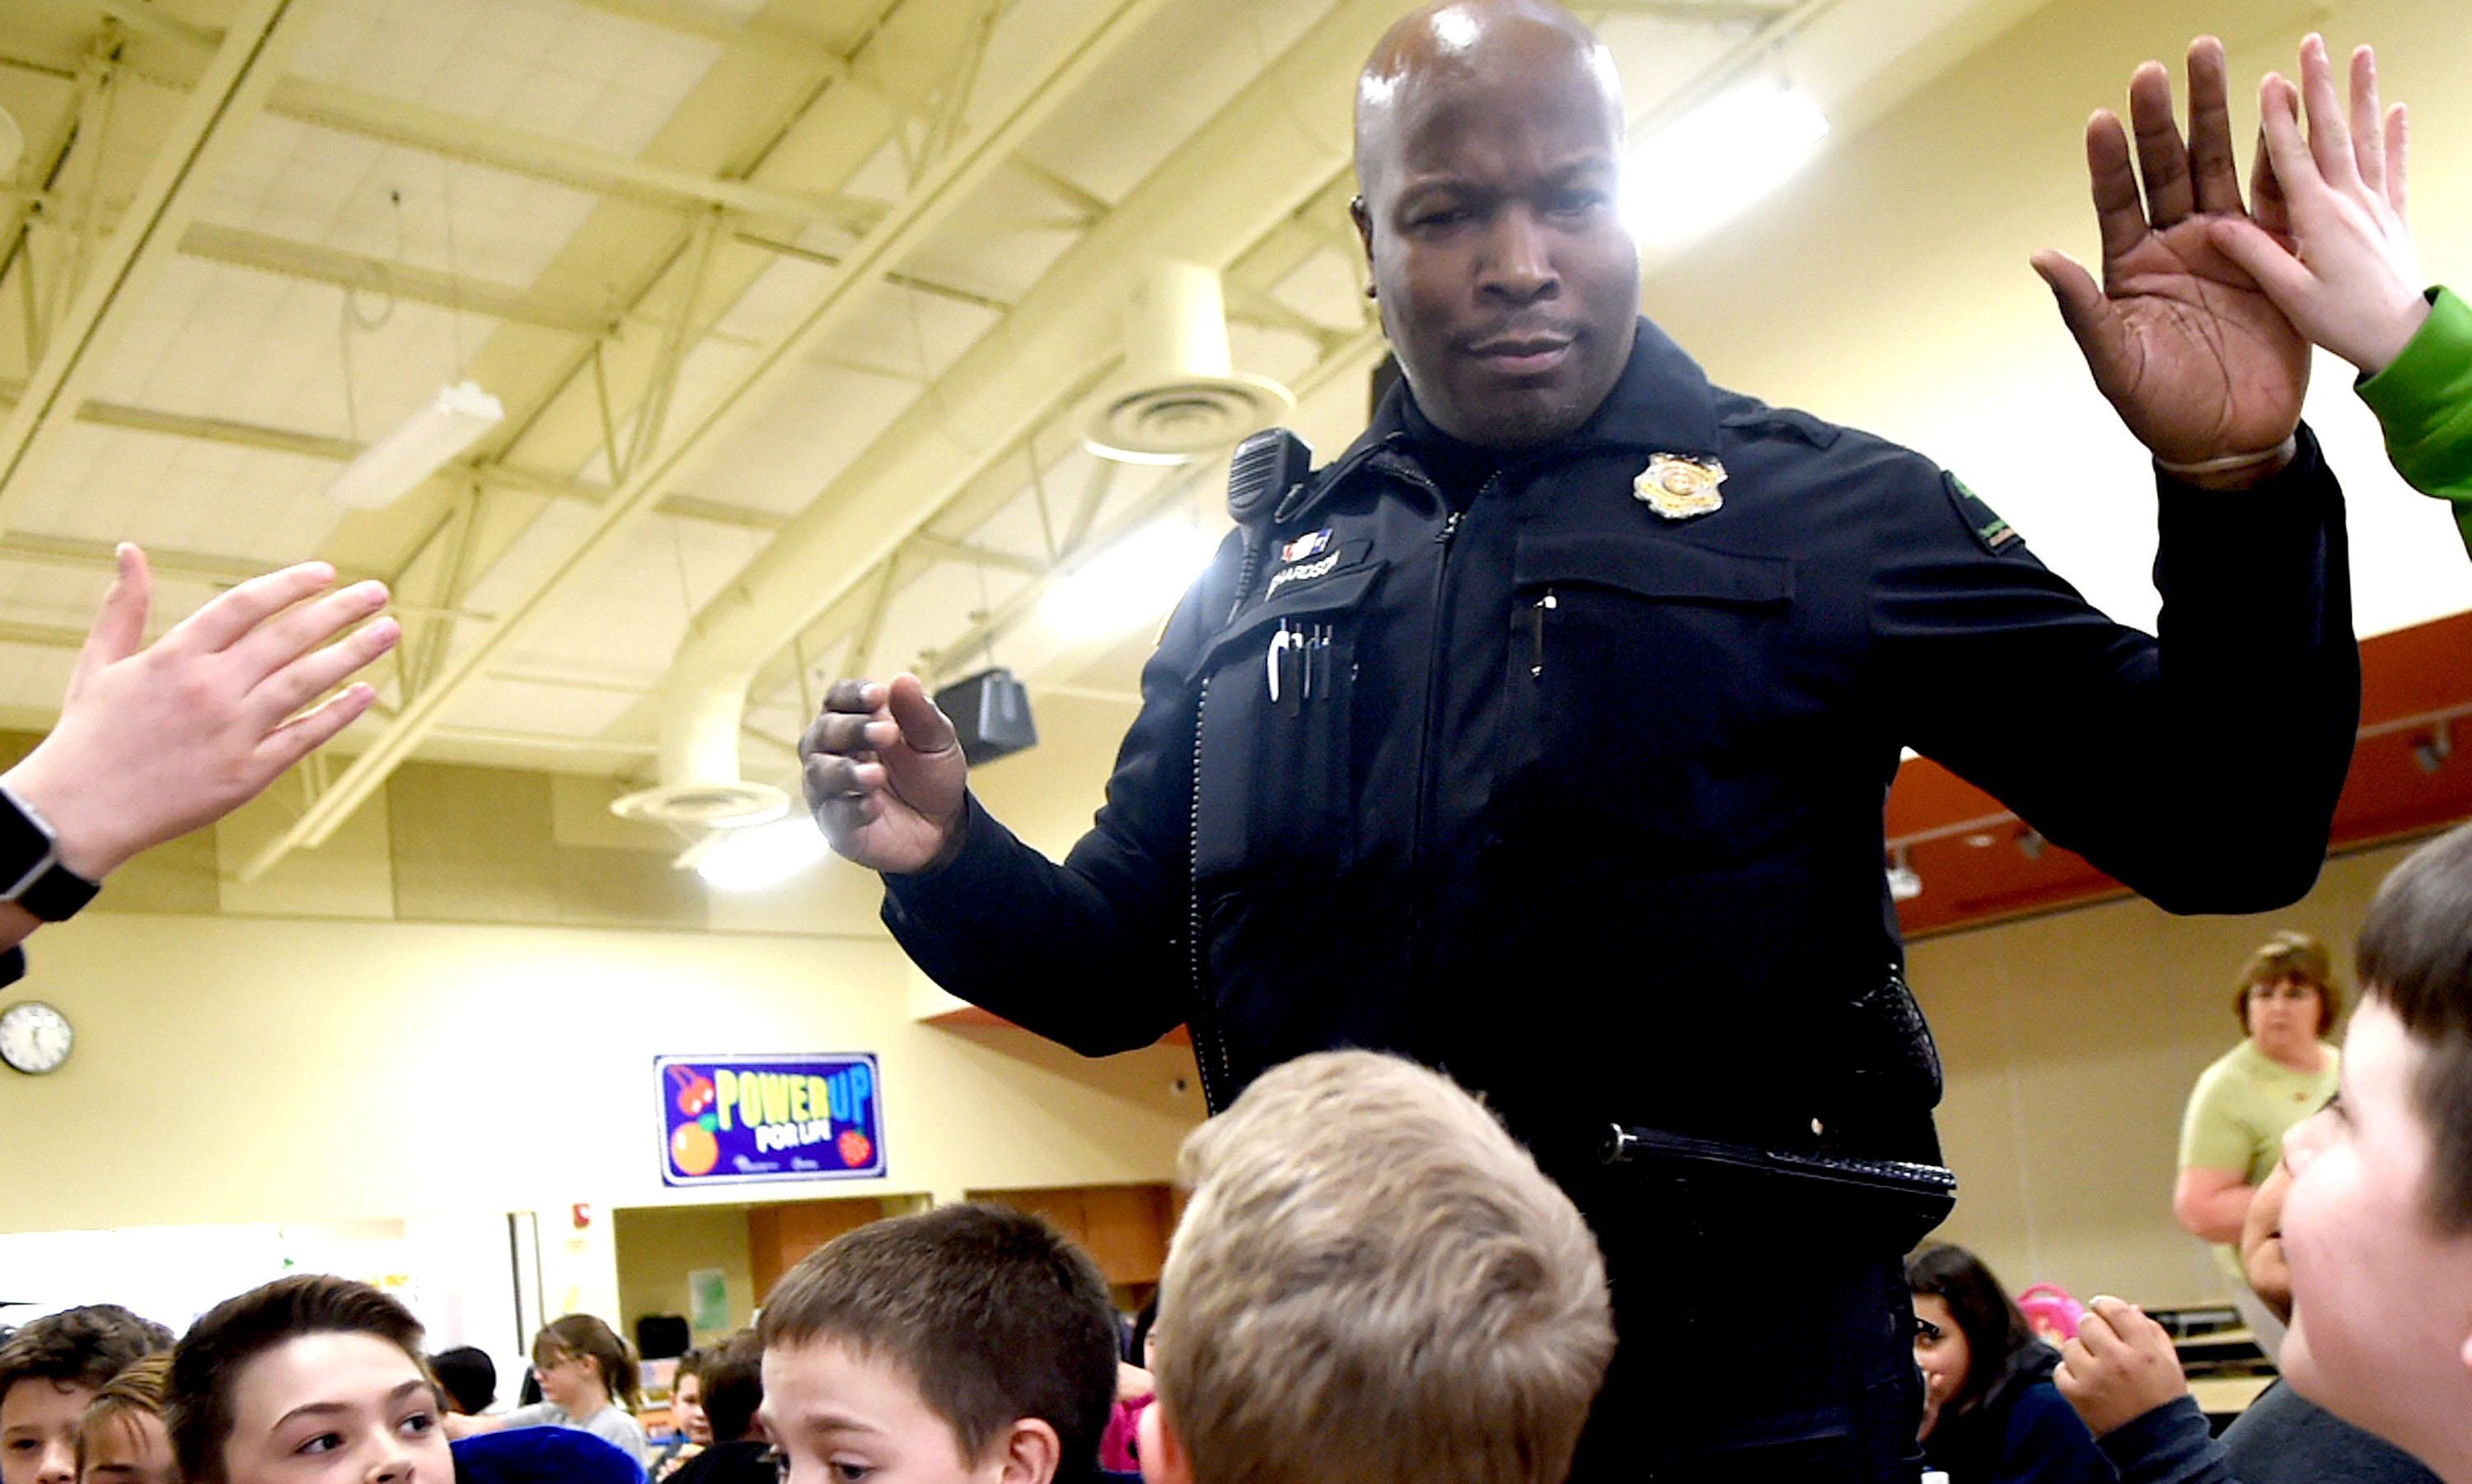 Aclu Report Critical Overall On School Resource Officers But Cites Spokane Public Schools For 